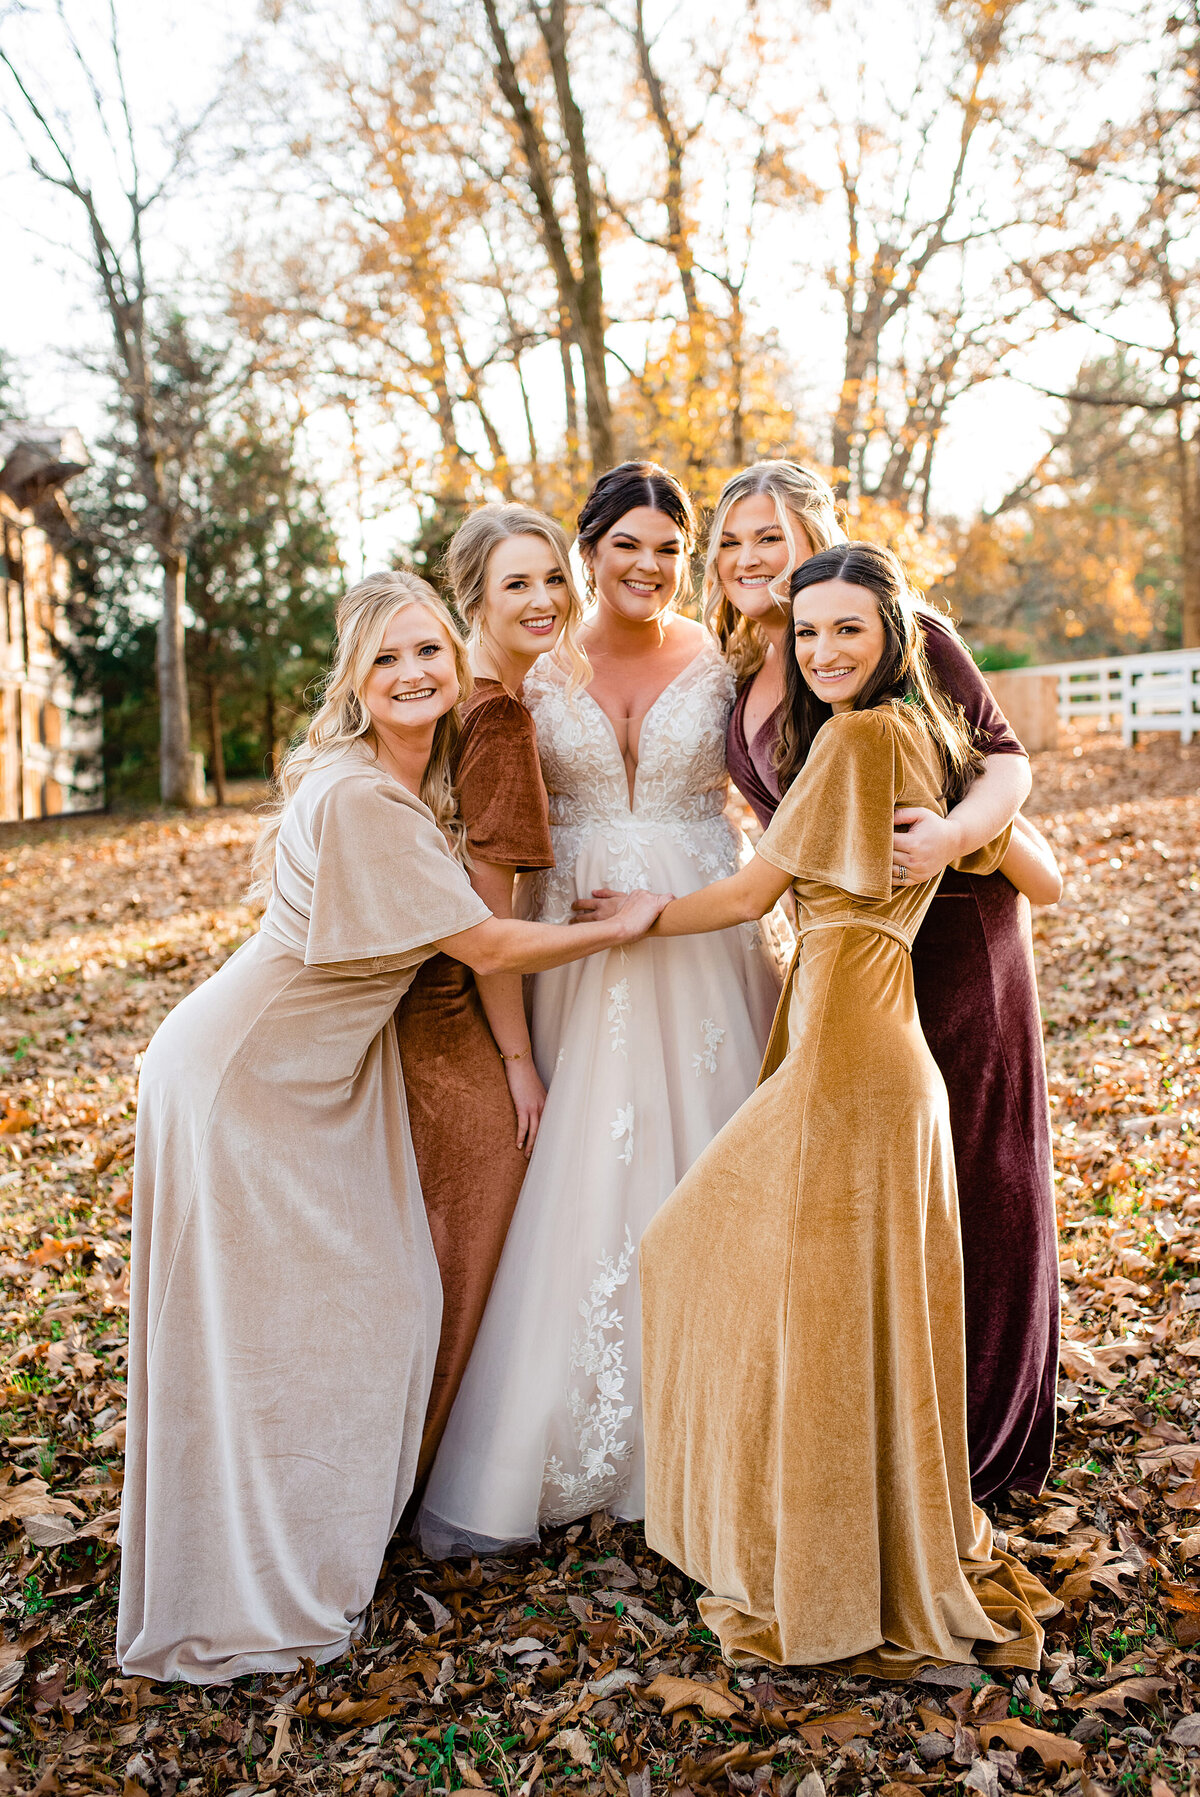 Bride walking with her bridesmaids under autumn leaves